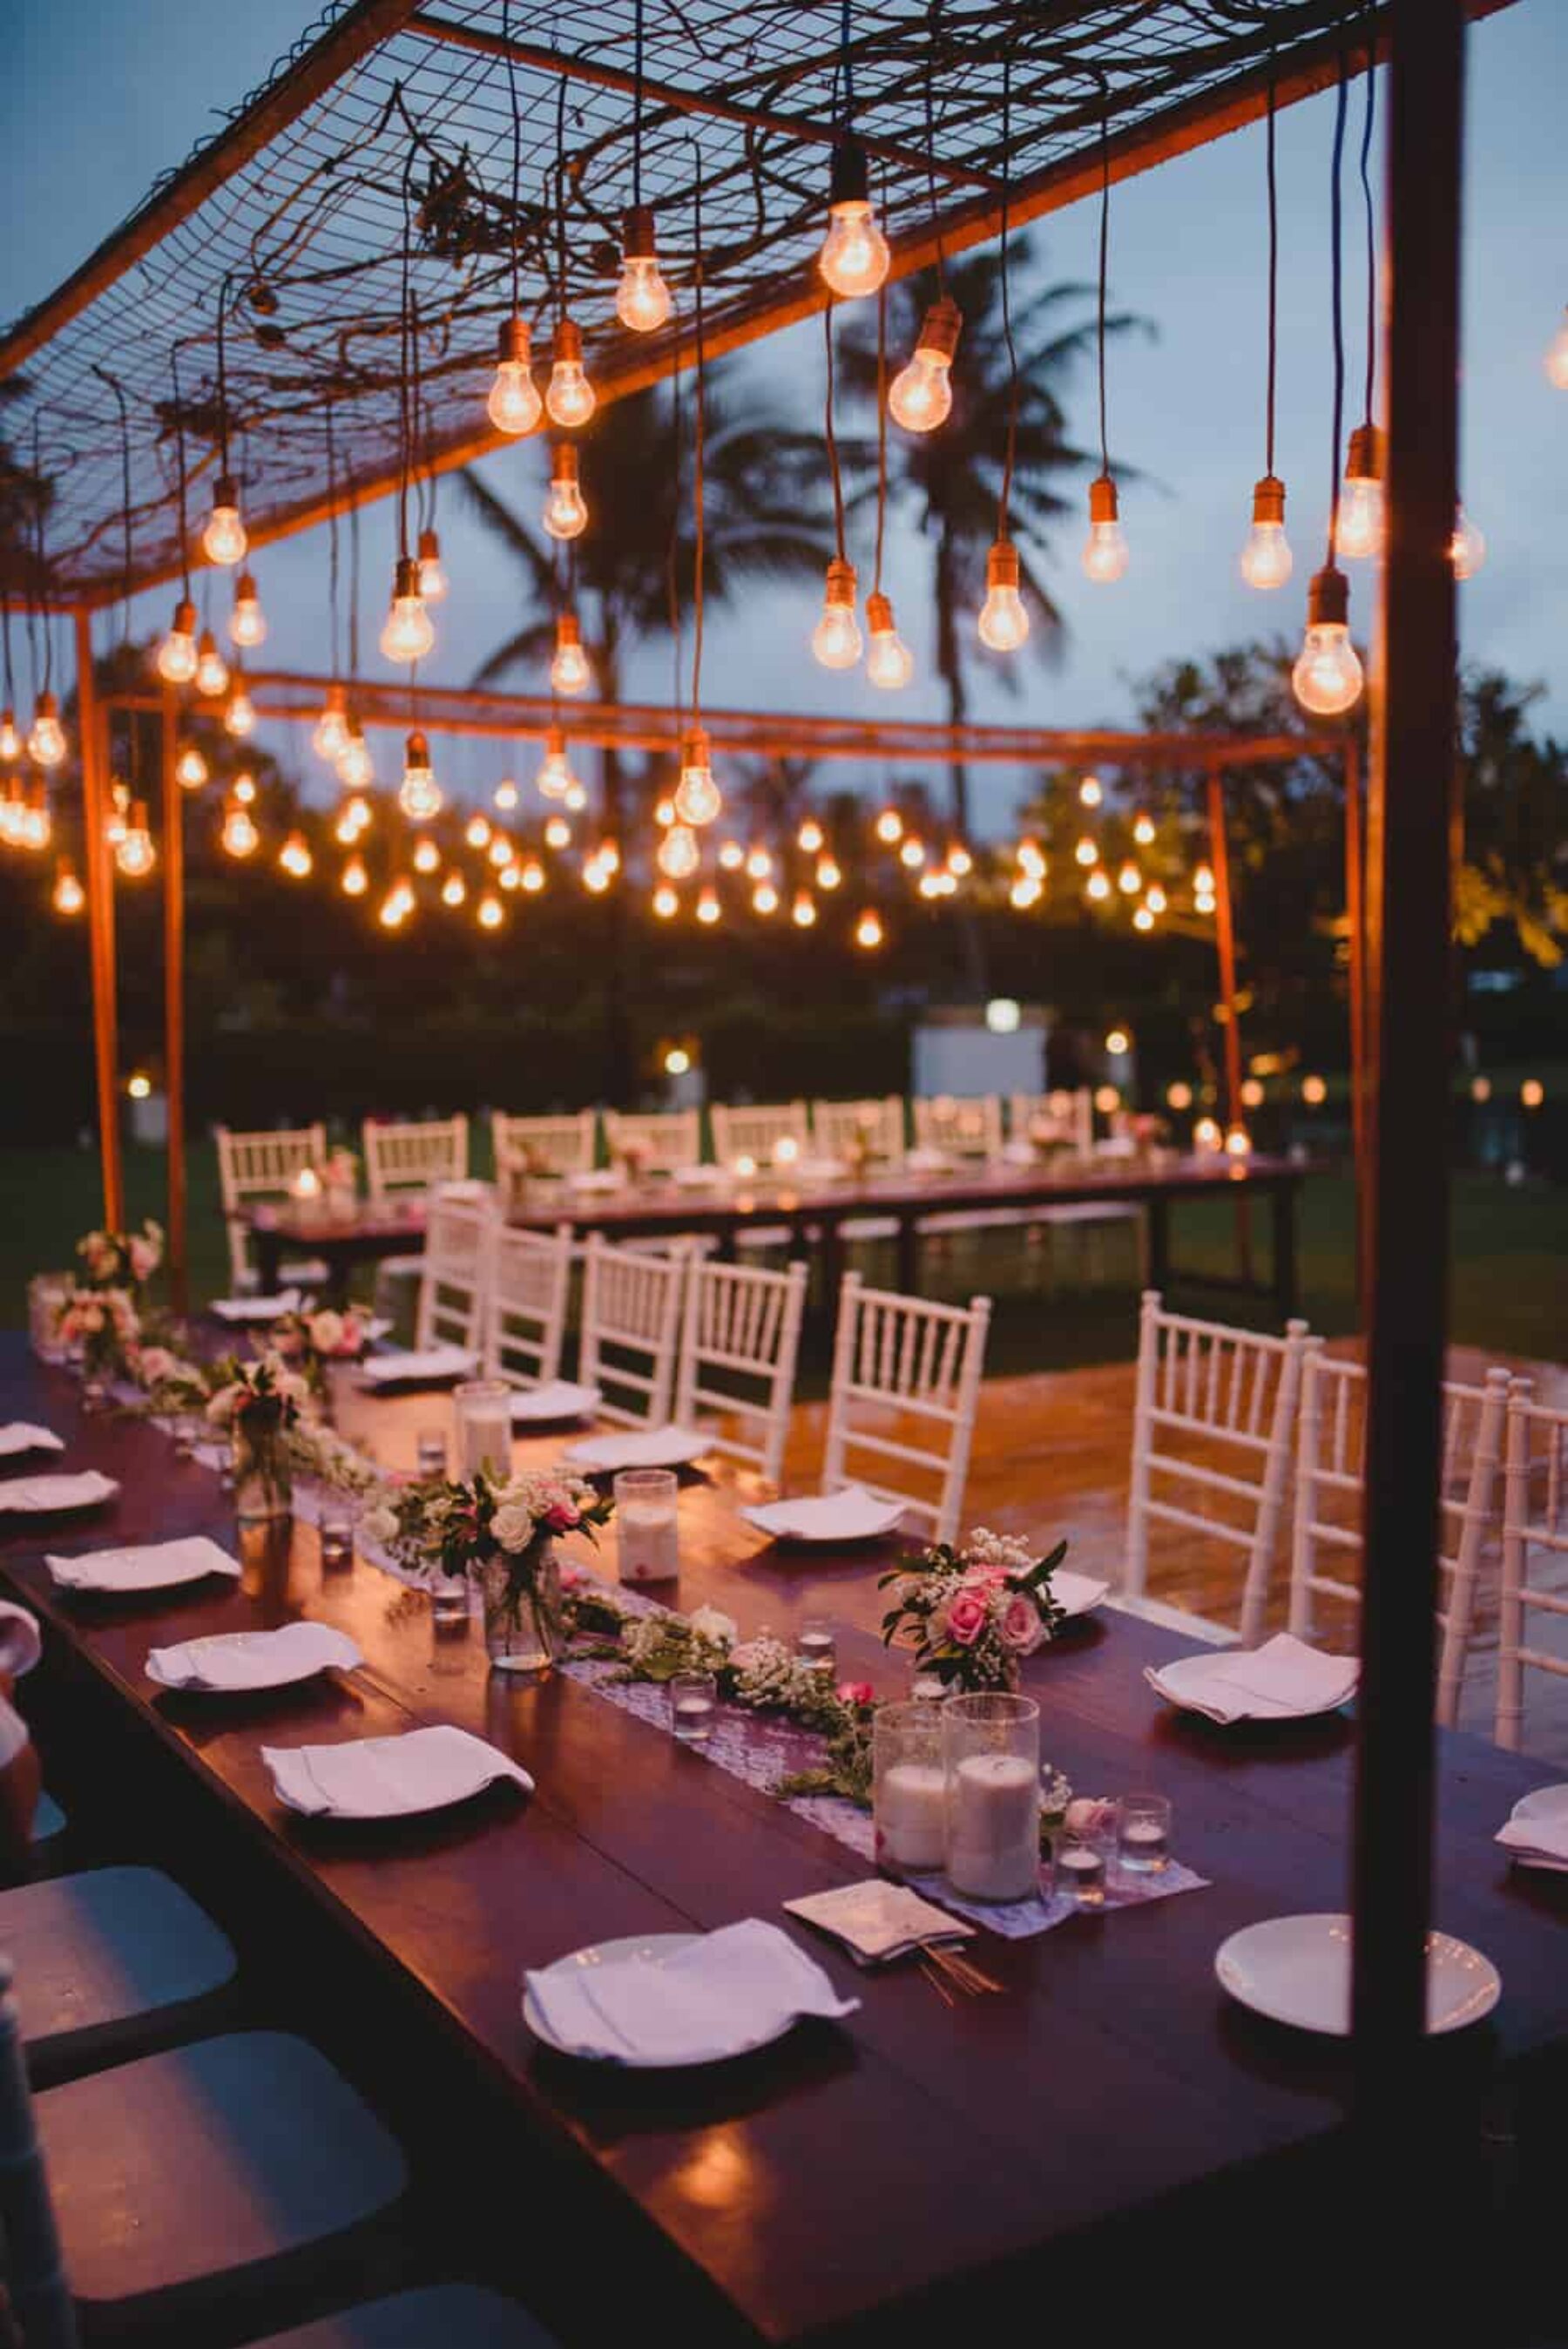 outdoor wedding table setting with hanging lights